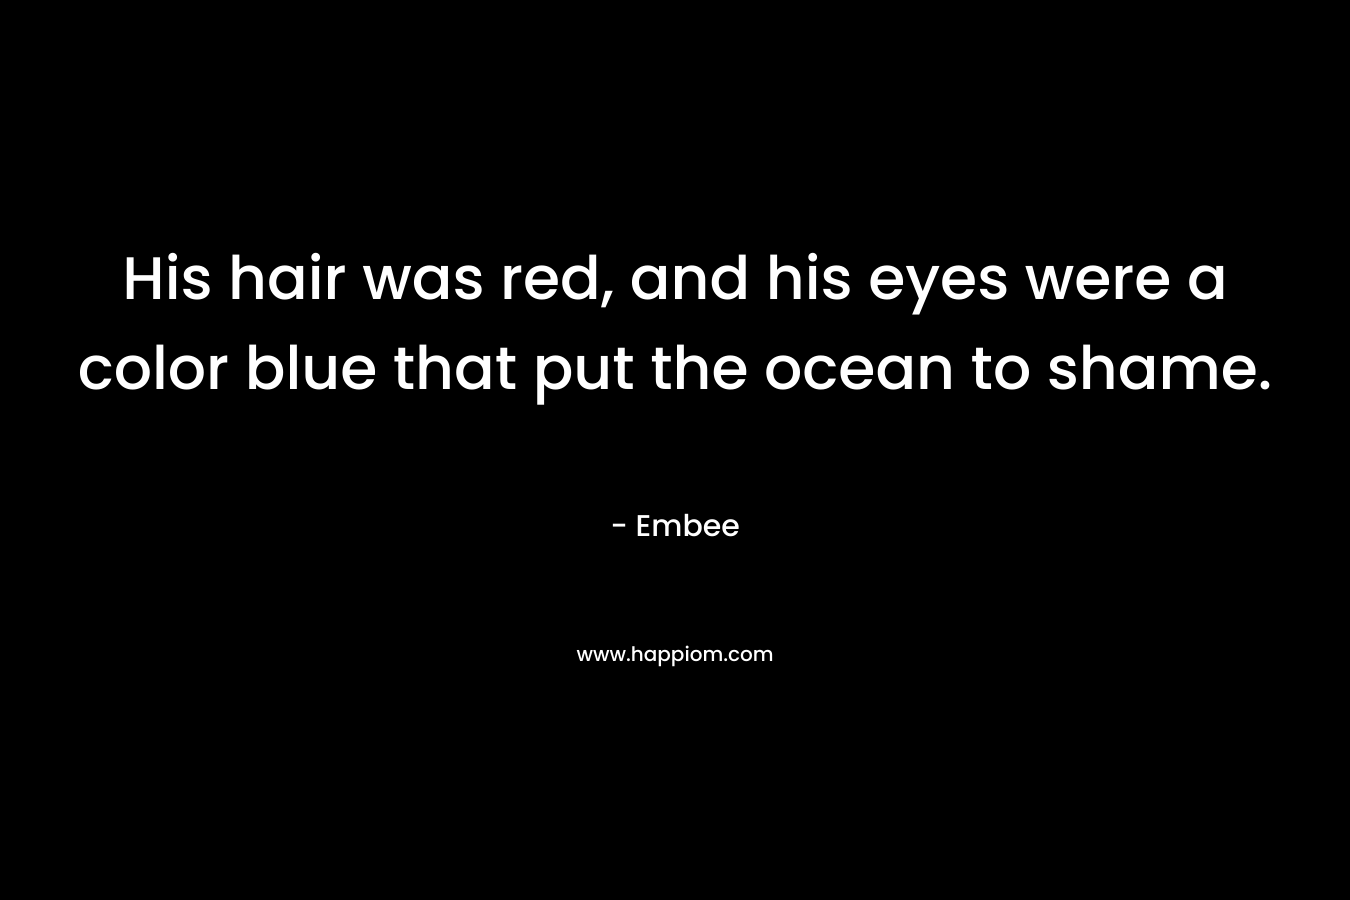 His hair was red, and his eyes were a color blue that put the ocean to shame. – Embee